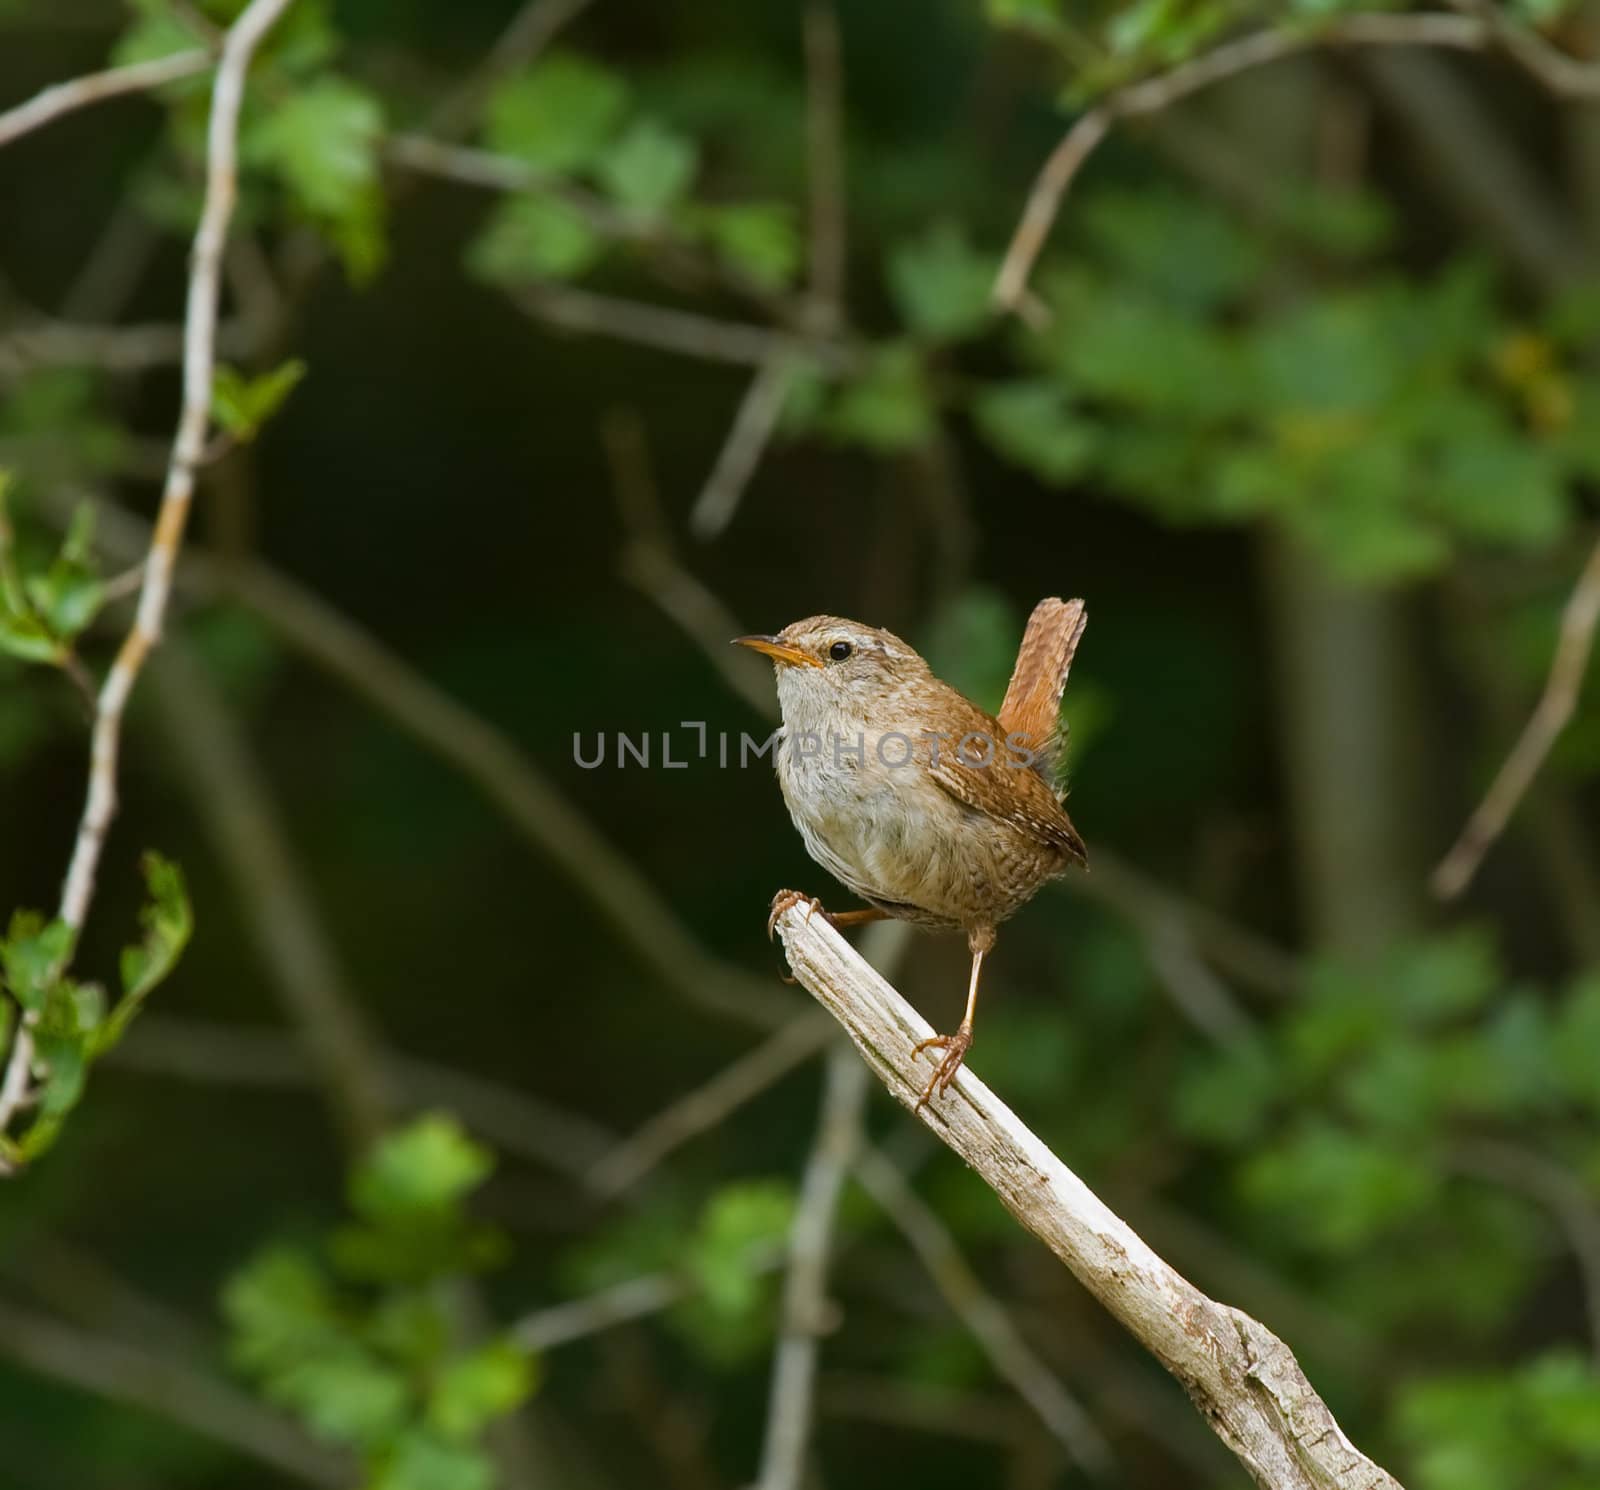 (Winter) Wren in traditional pose perched on branch in English woodland.